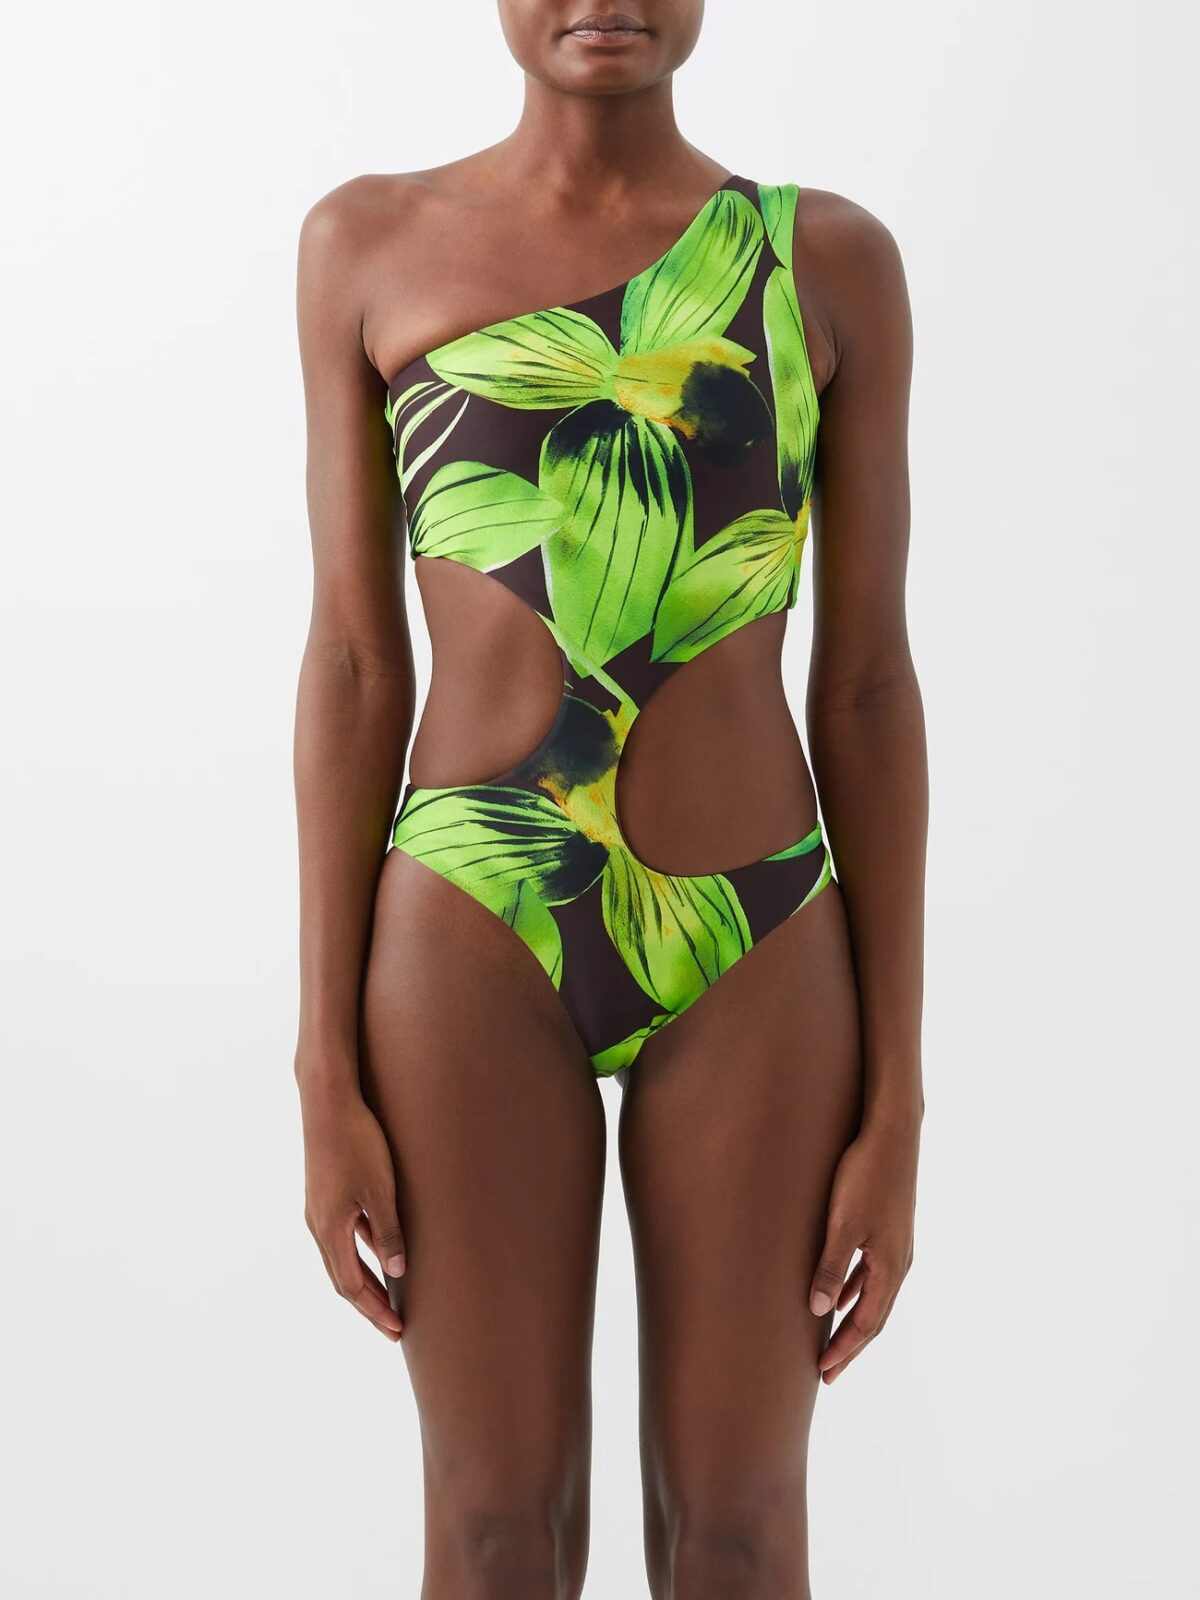 Best swimsuit fashion trends including bathing suits and bikinis, and hot swimwear colors for women from luxury designer Summer 2023